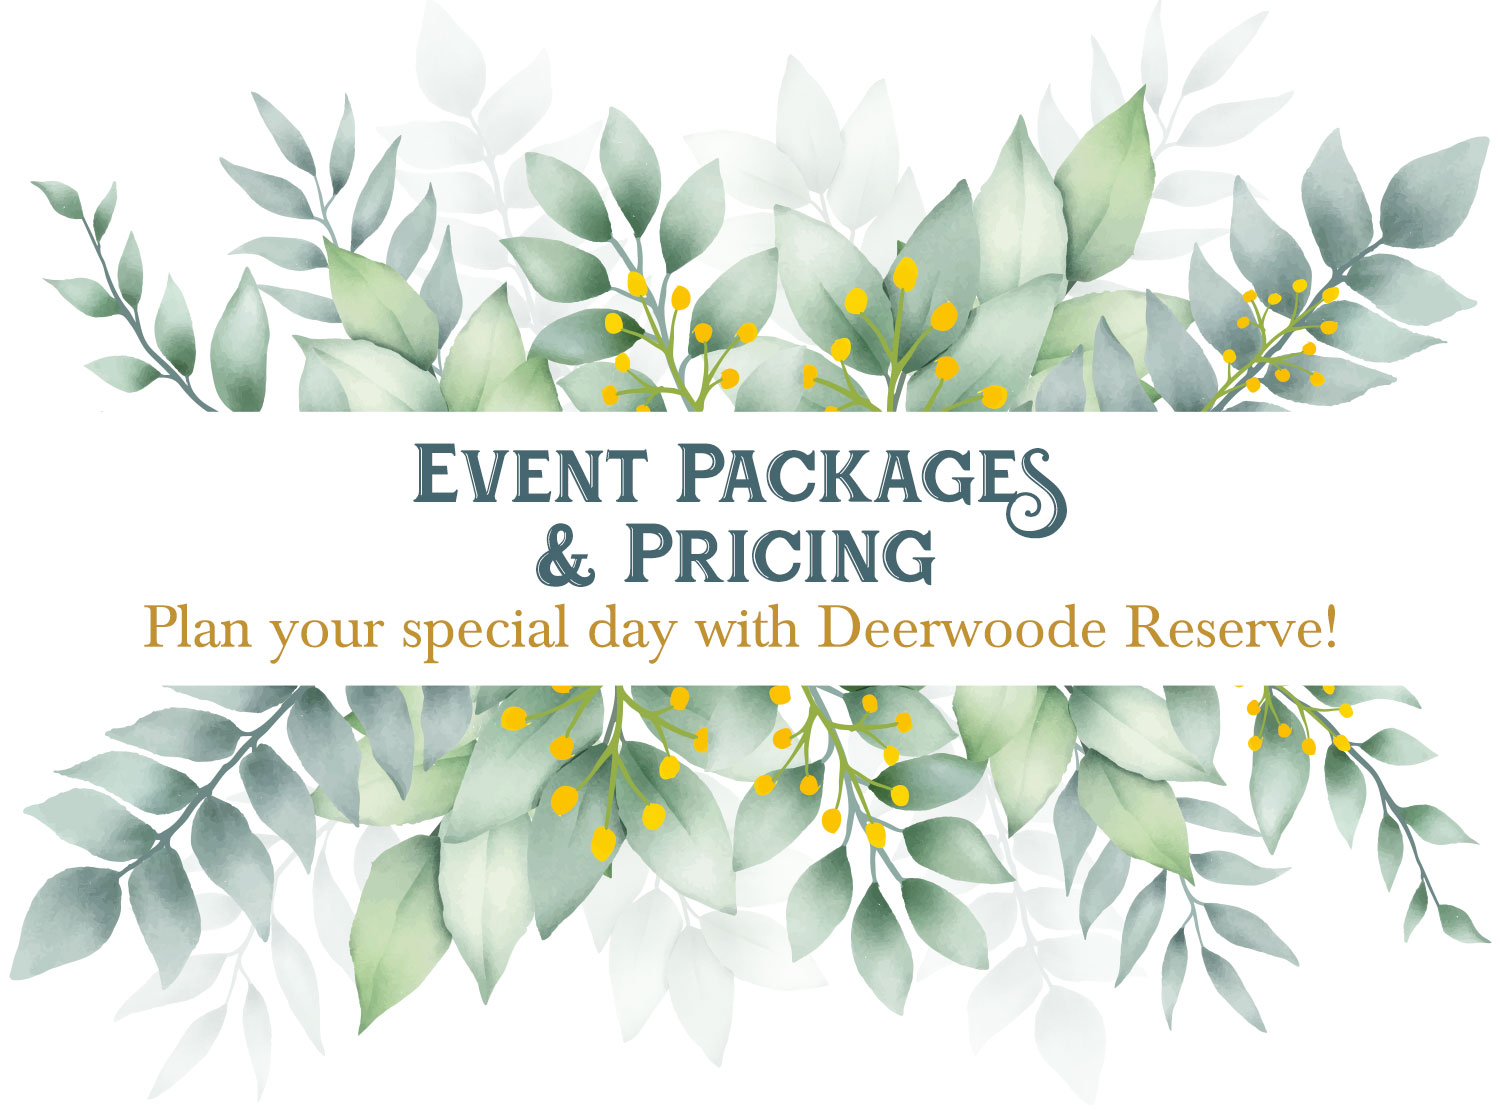 Mayes Event Center Pricing and Packages - Event center in North Carolina